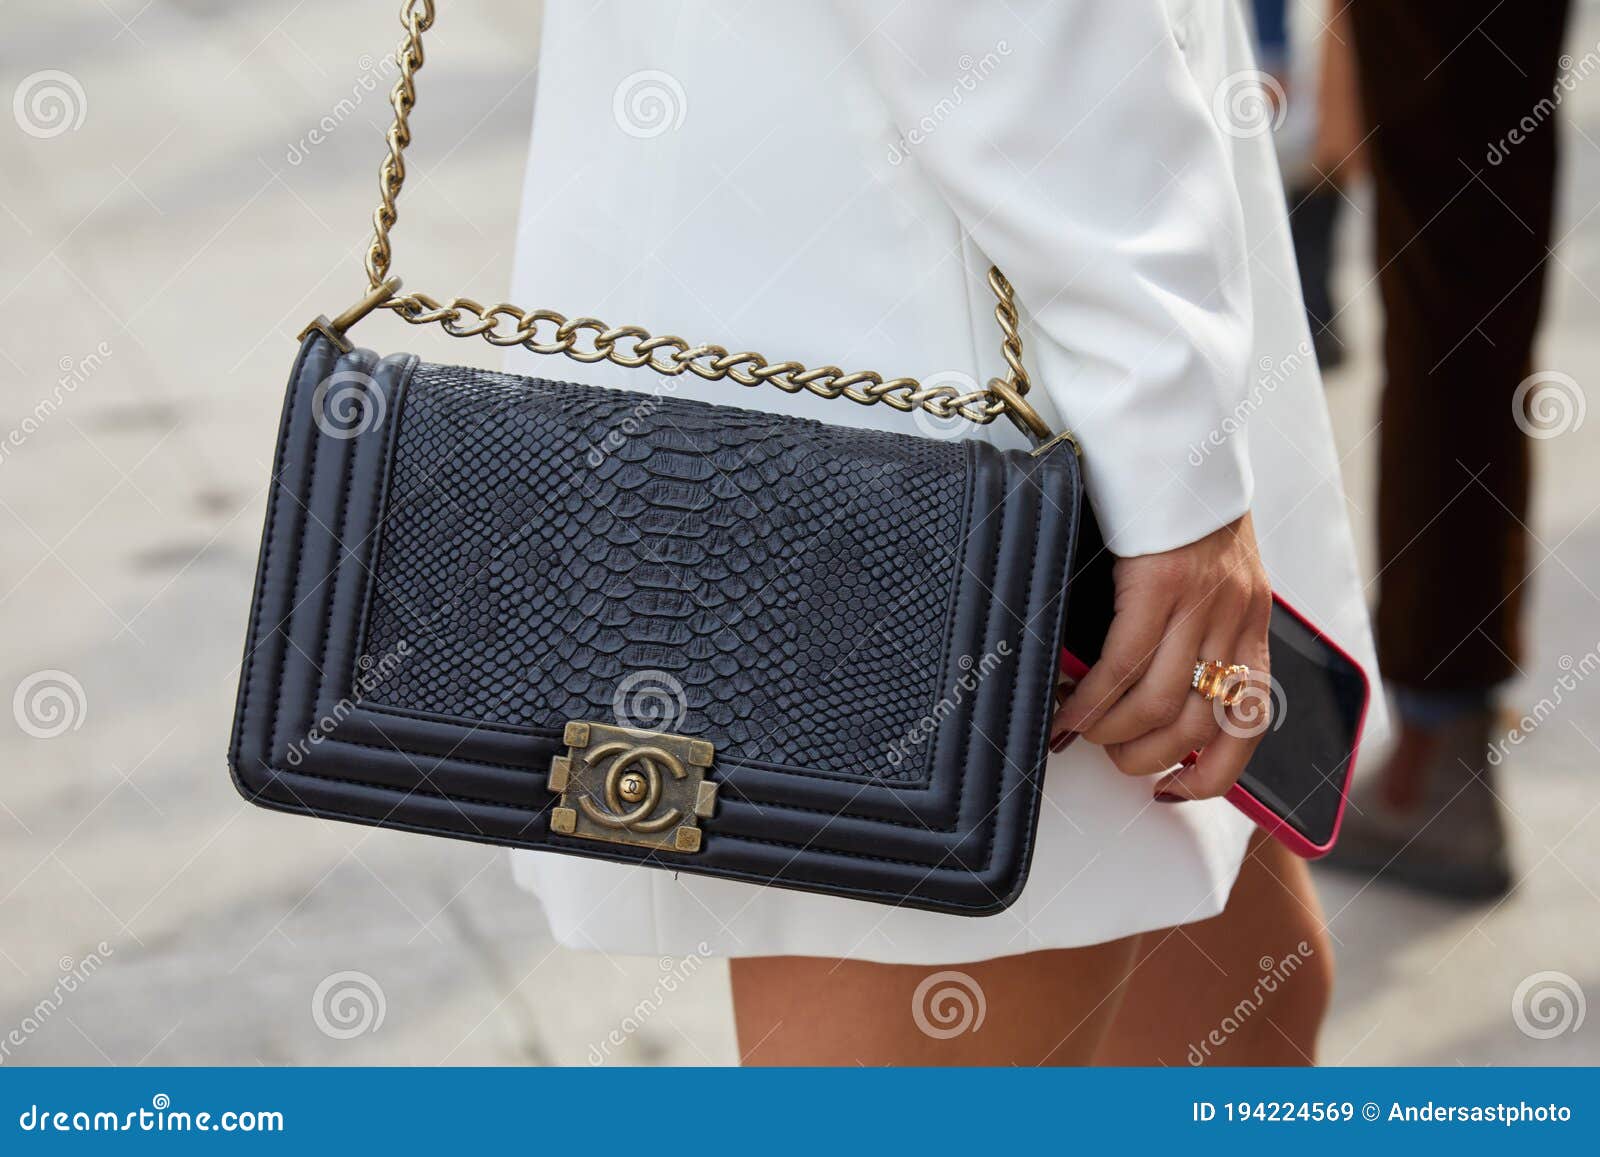 Woman with Black Crocodile Leather Chanel Bag before Tiziano Guardini  Fashion Show, Milan Editorial Stock Image - Image of leather, september:  194224569